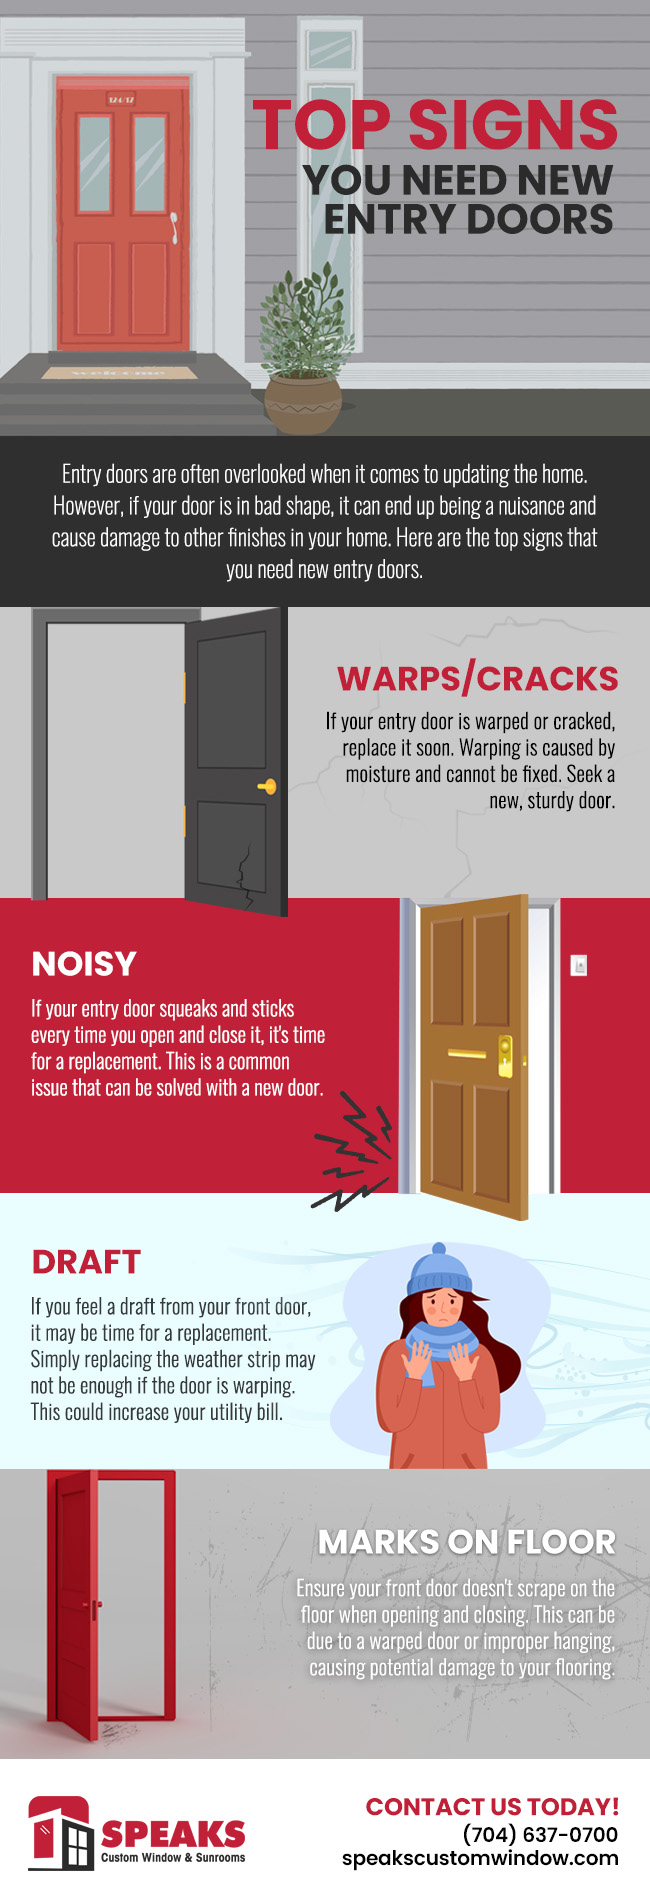 Top Signs You Need New Entry Doors 